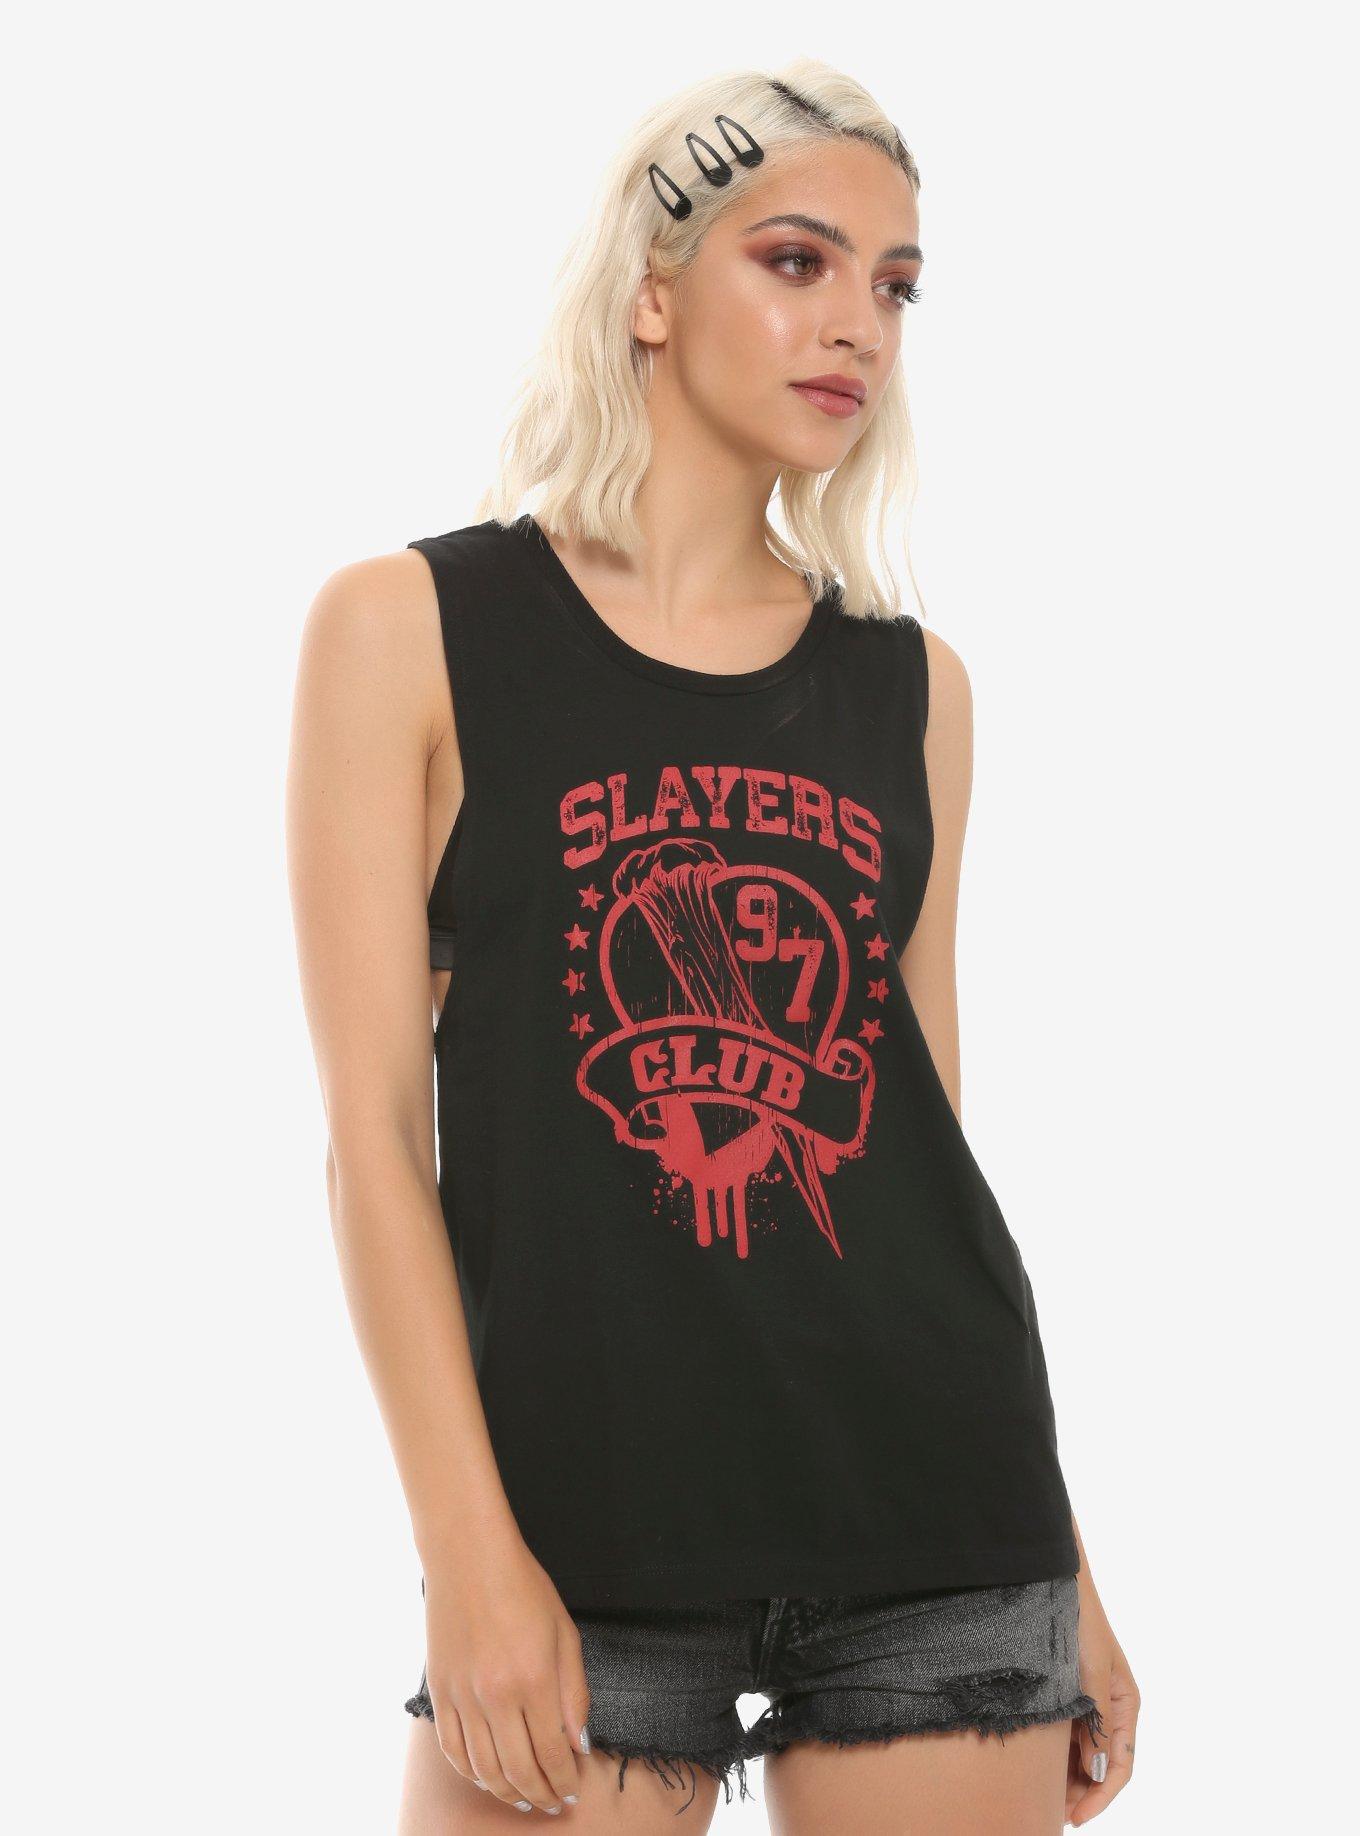 Buffy The Vampire Slayer Slayers Club Girls Muscle Top, RED, hi-res